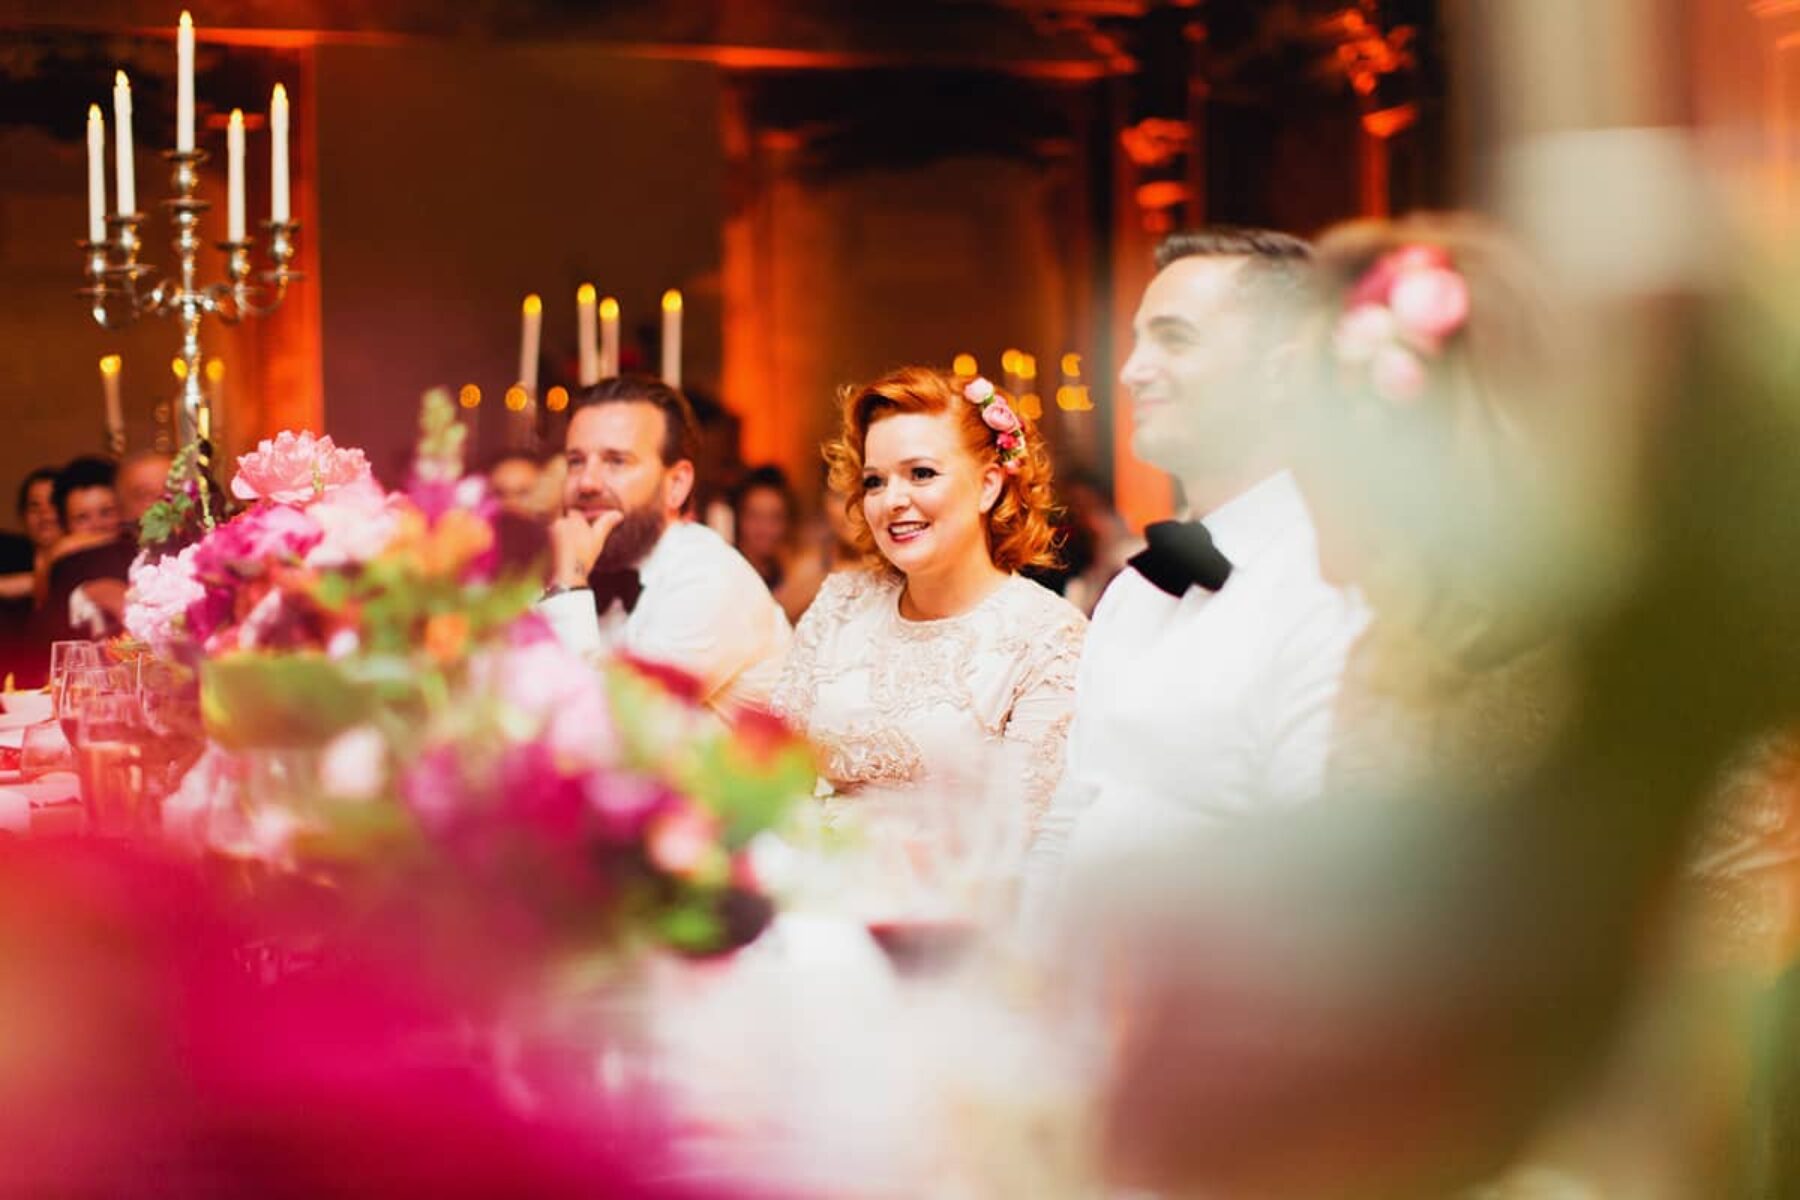 Melbourne wedding at The George Ballroom - photography by Sayher Heffernan